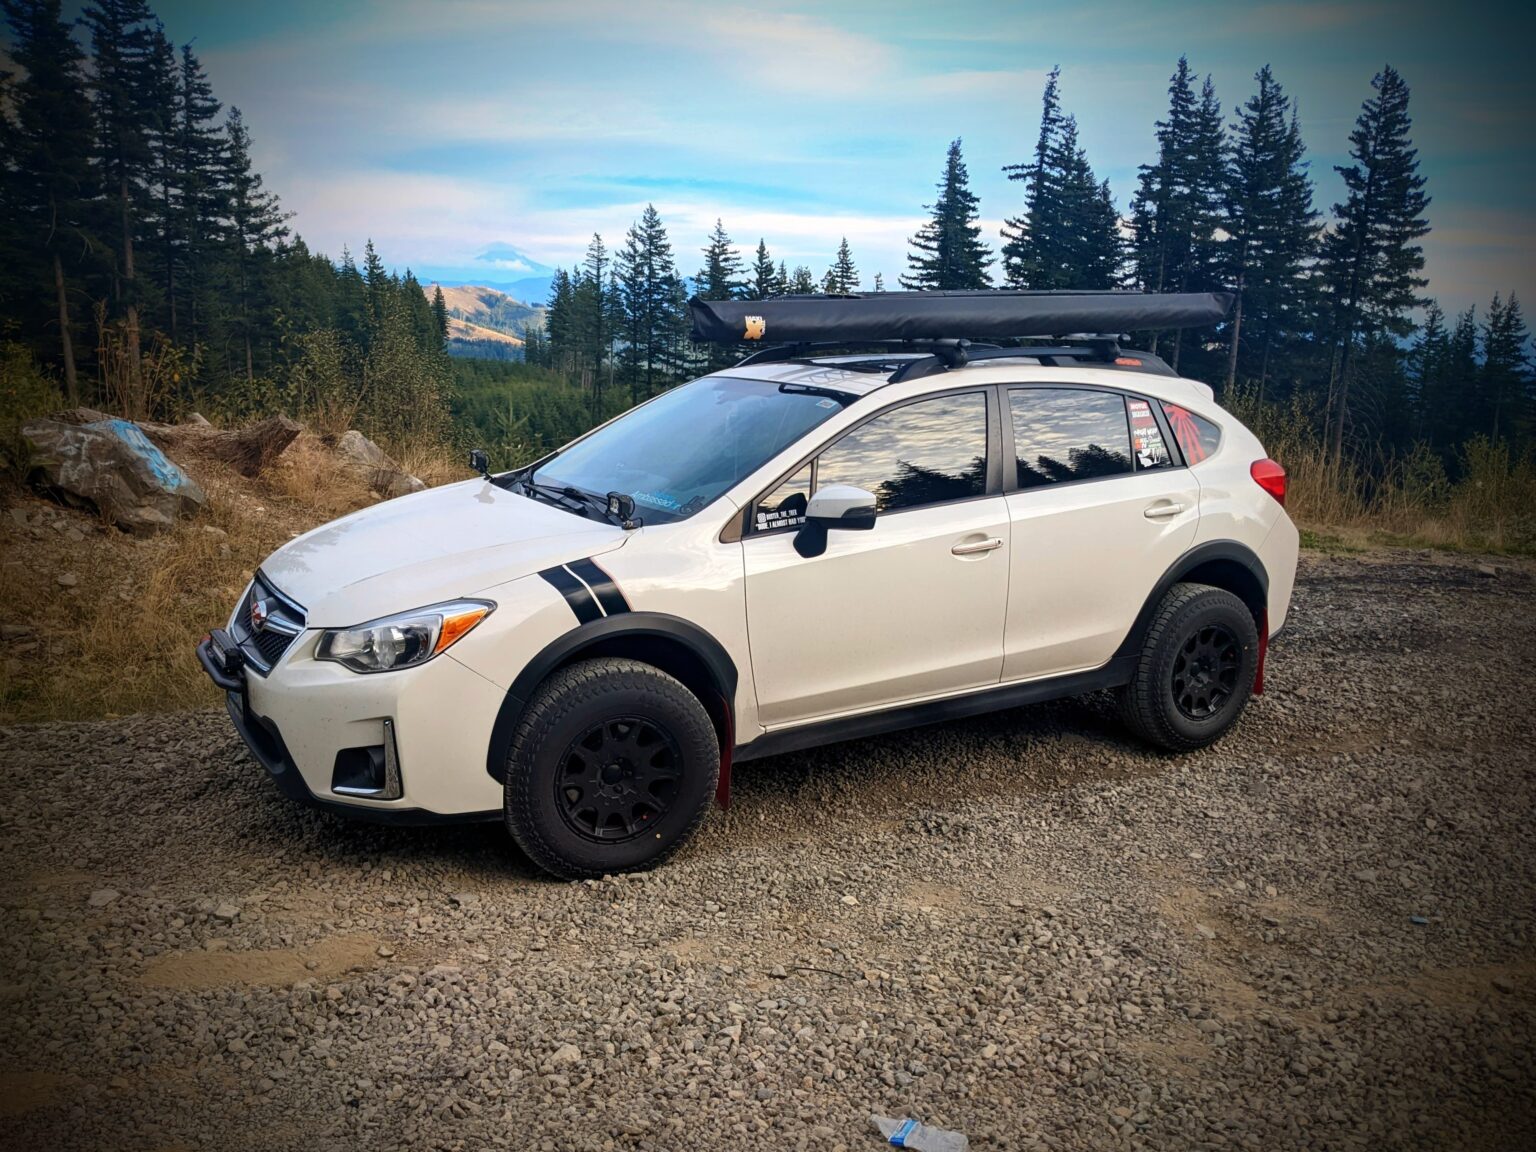 2016 subaru crosstrek lifted with offroad tires and wheels in the forest